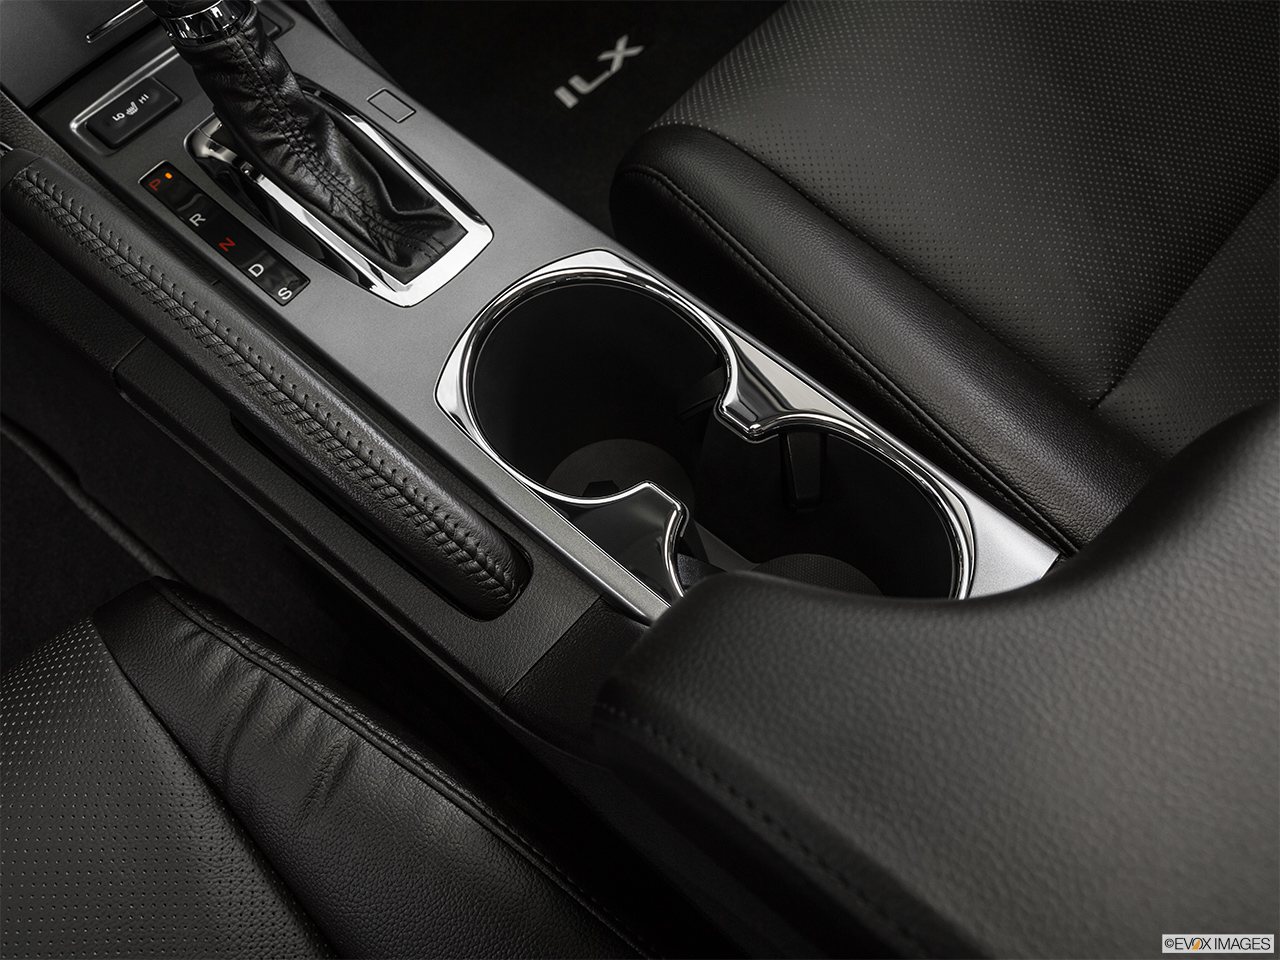 2015 Acura ILX 5-Speed Automatic Cup holders. 